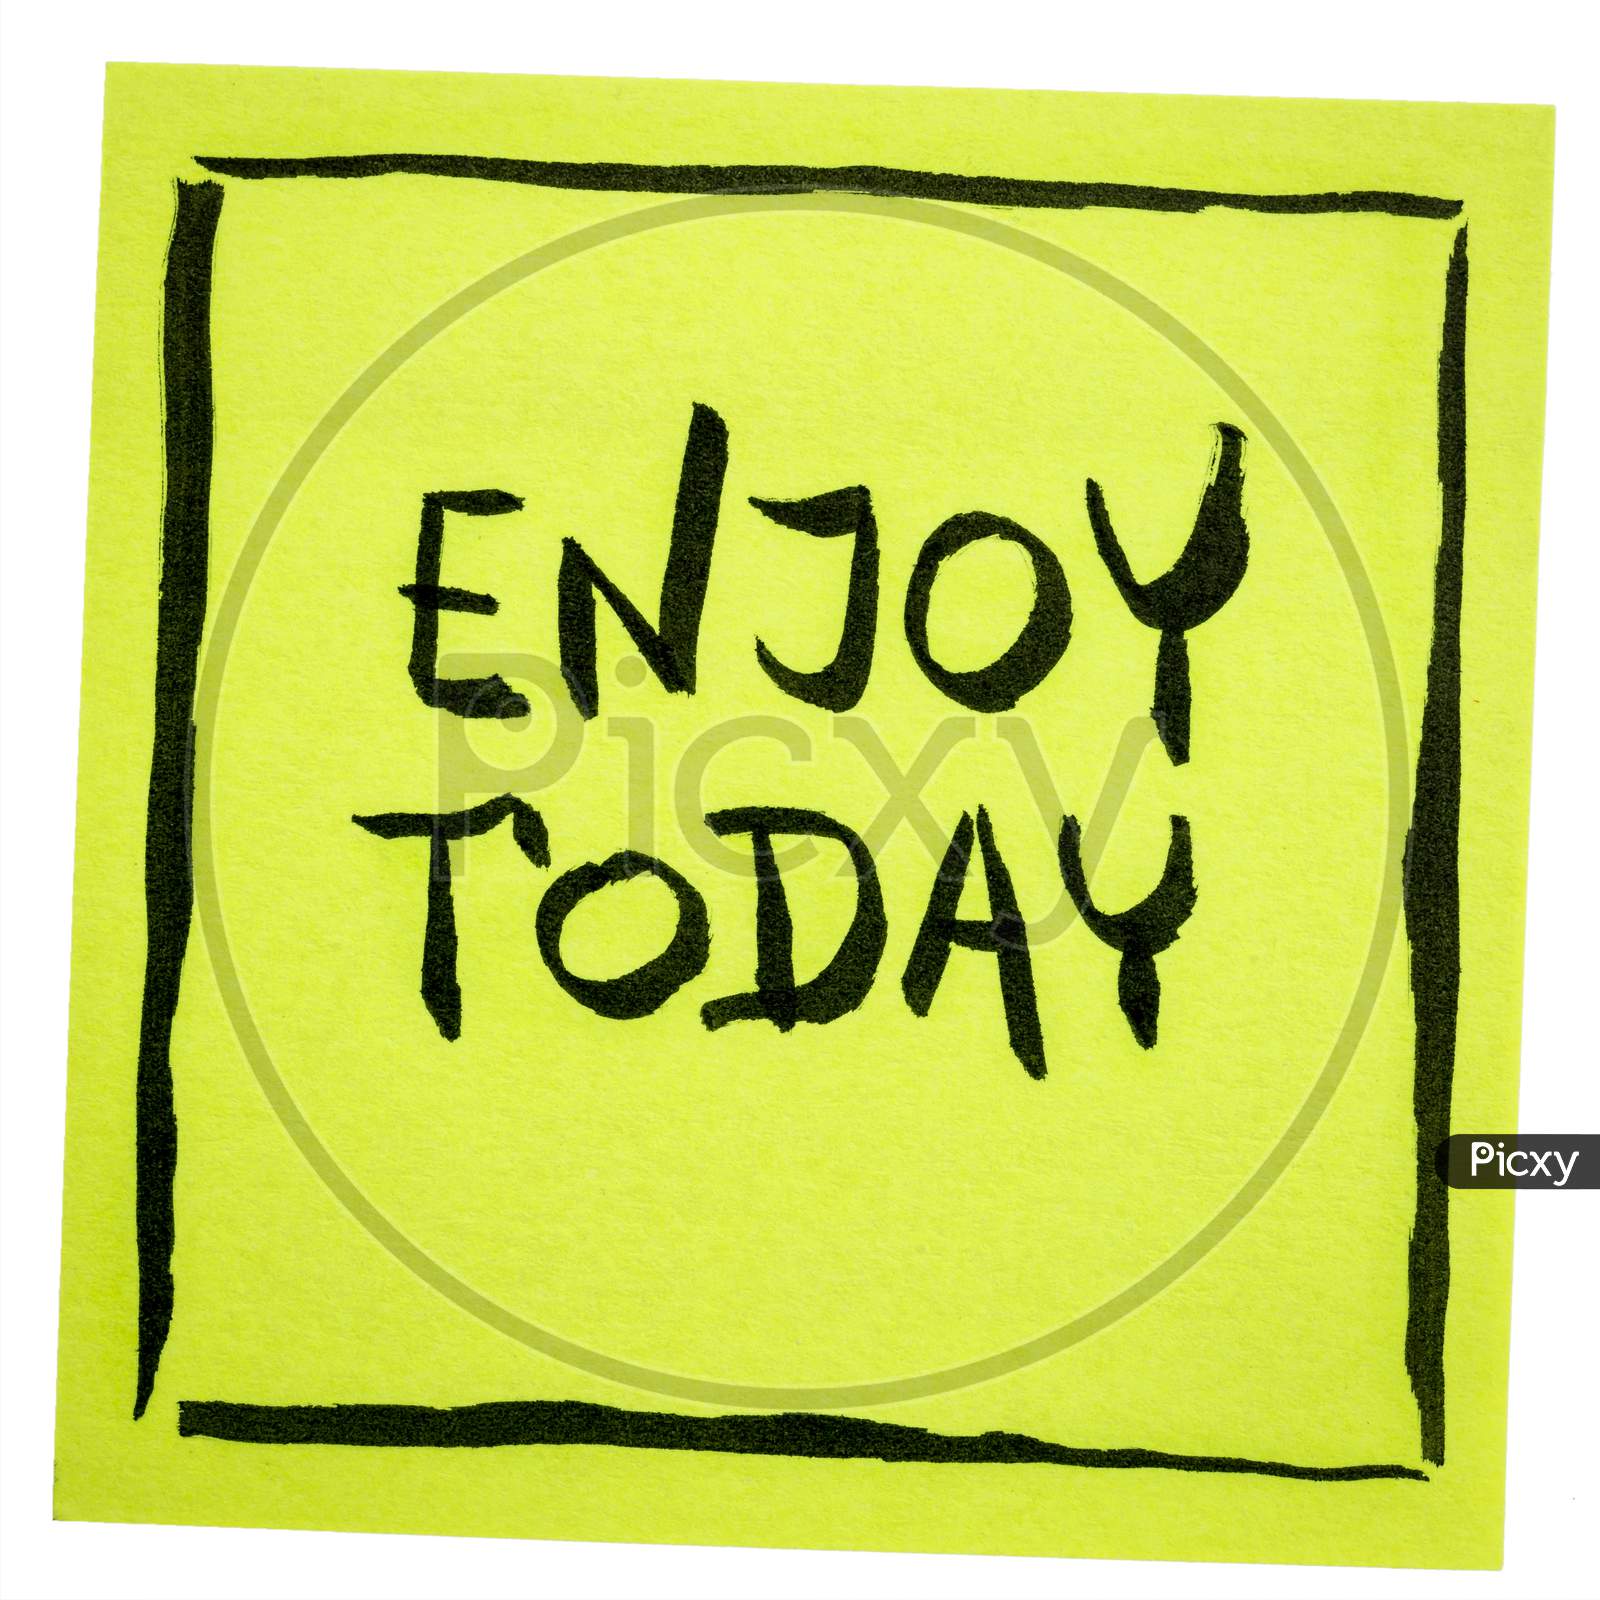 Enjoy Today Reminder - Handwriting On An Isolated Sticky Note, Positive Attitude And Mindset Concept